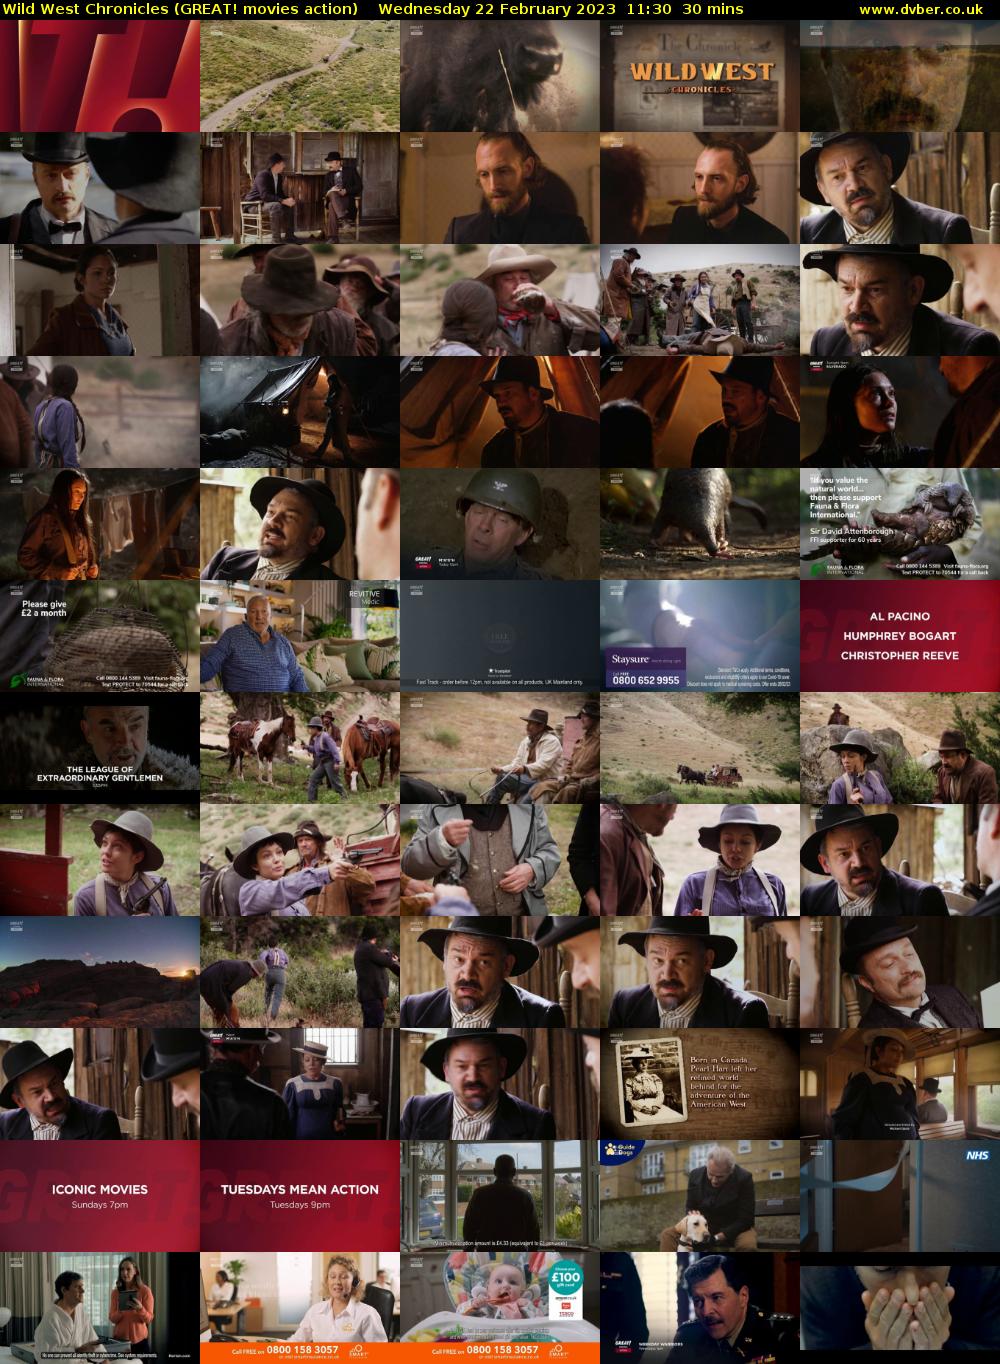 Wild West Chronicles (GREAT! movies action) Wednesday 22 February 2023 11:30 - 12:00